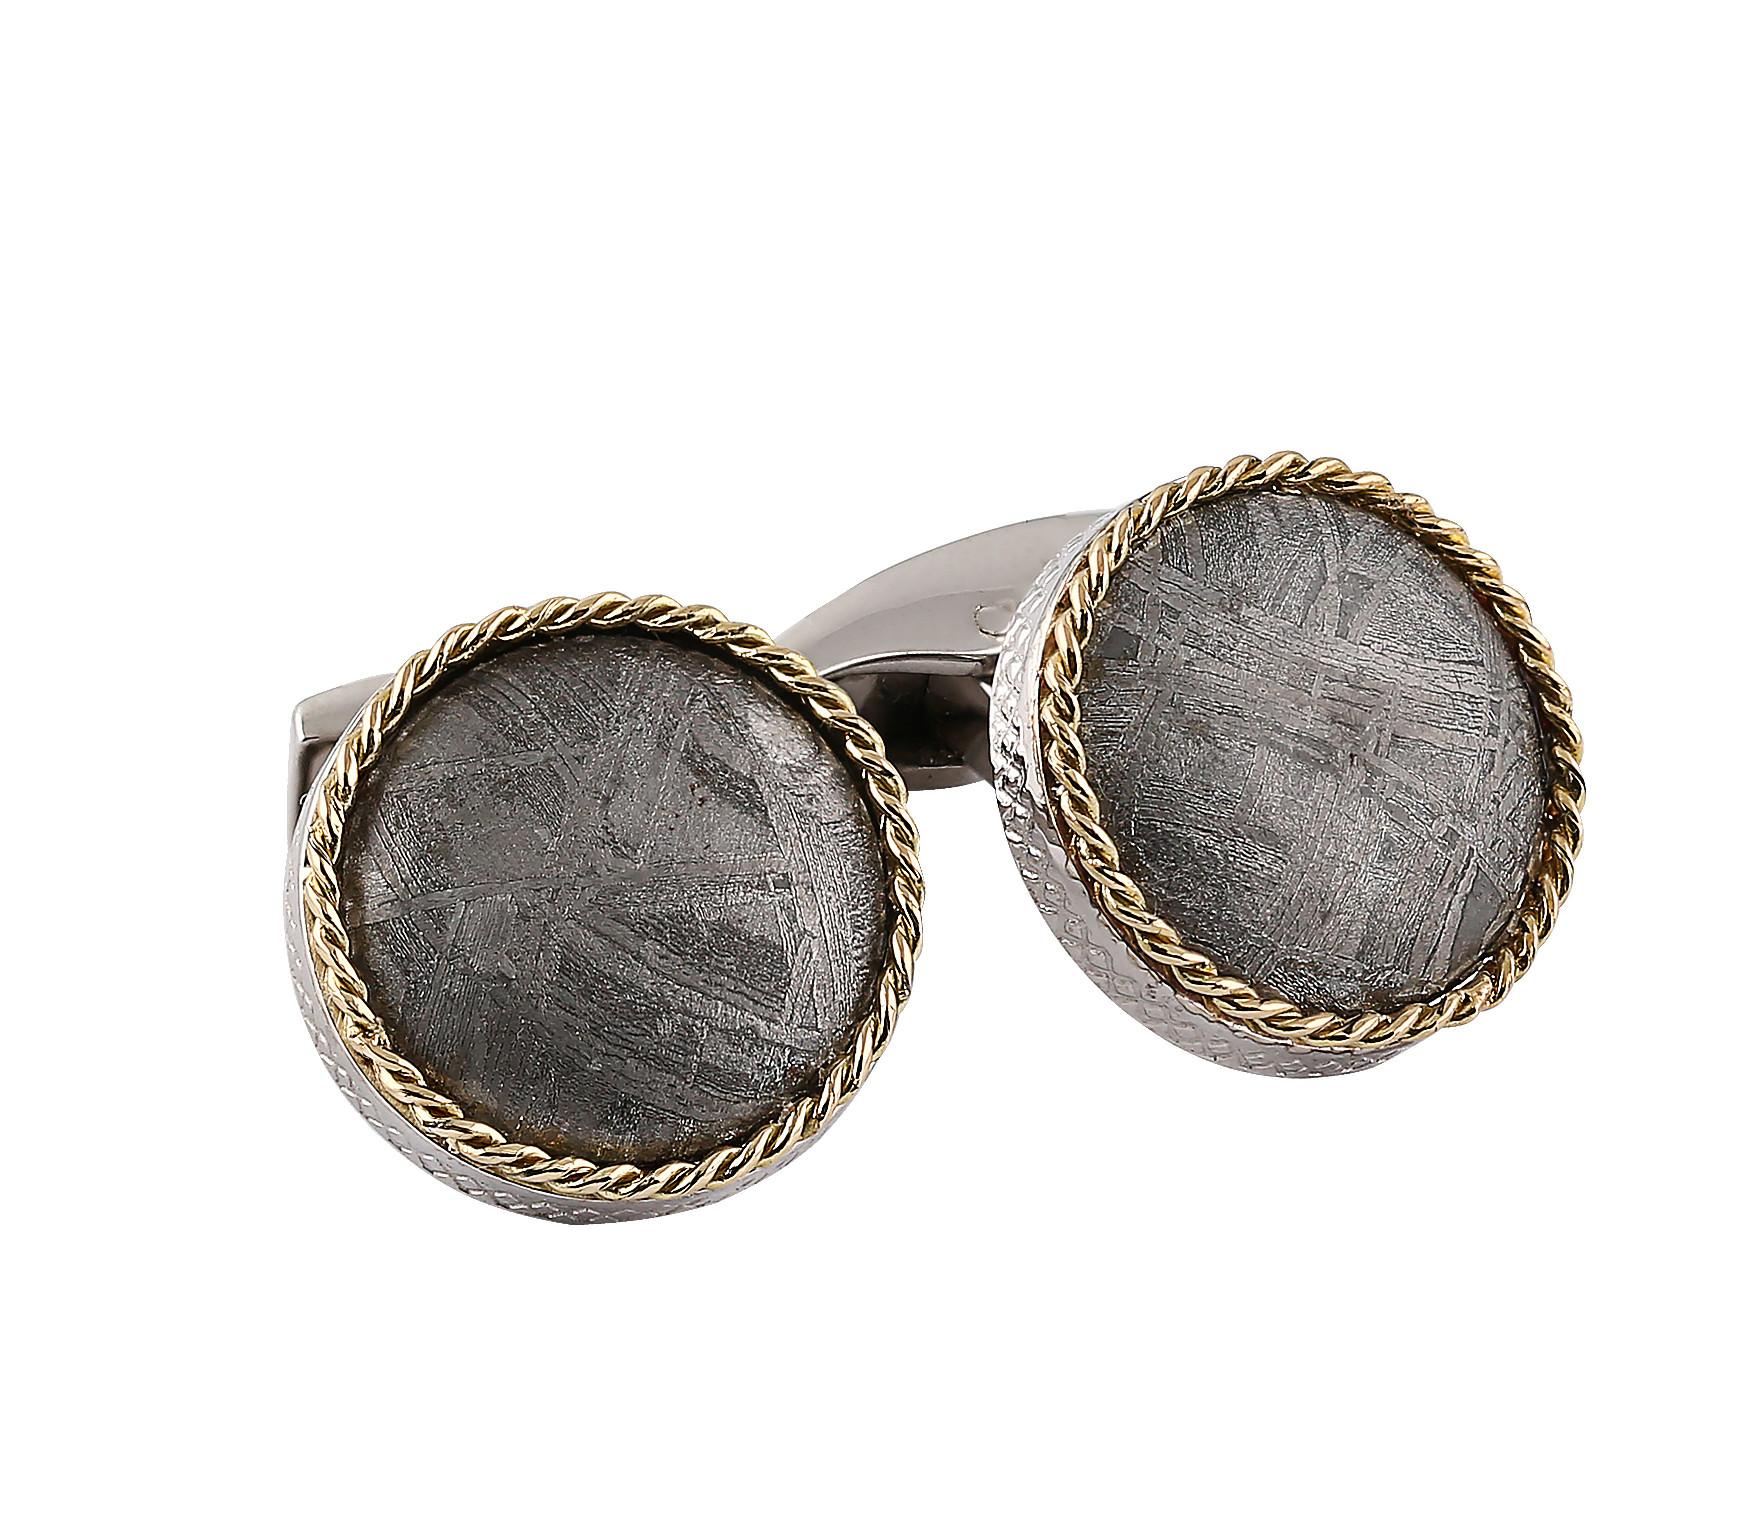 Showcase your unique sense of style in these limited edition round cufflinks. Rare natural meteorite forms an unusual centrepiece – each Muonionalusta meteorite fragment is over 30,000 years old, with a natural patterned surface. Encased in sterling